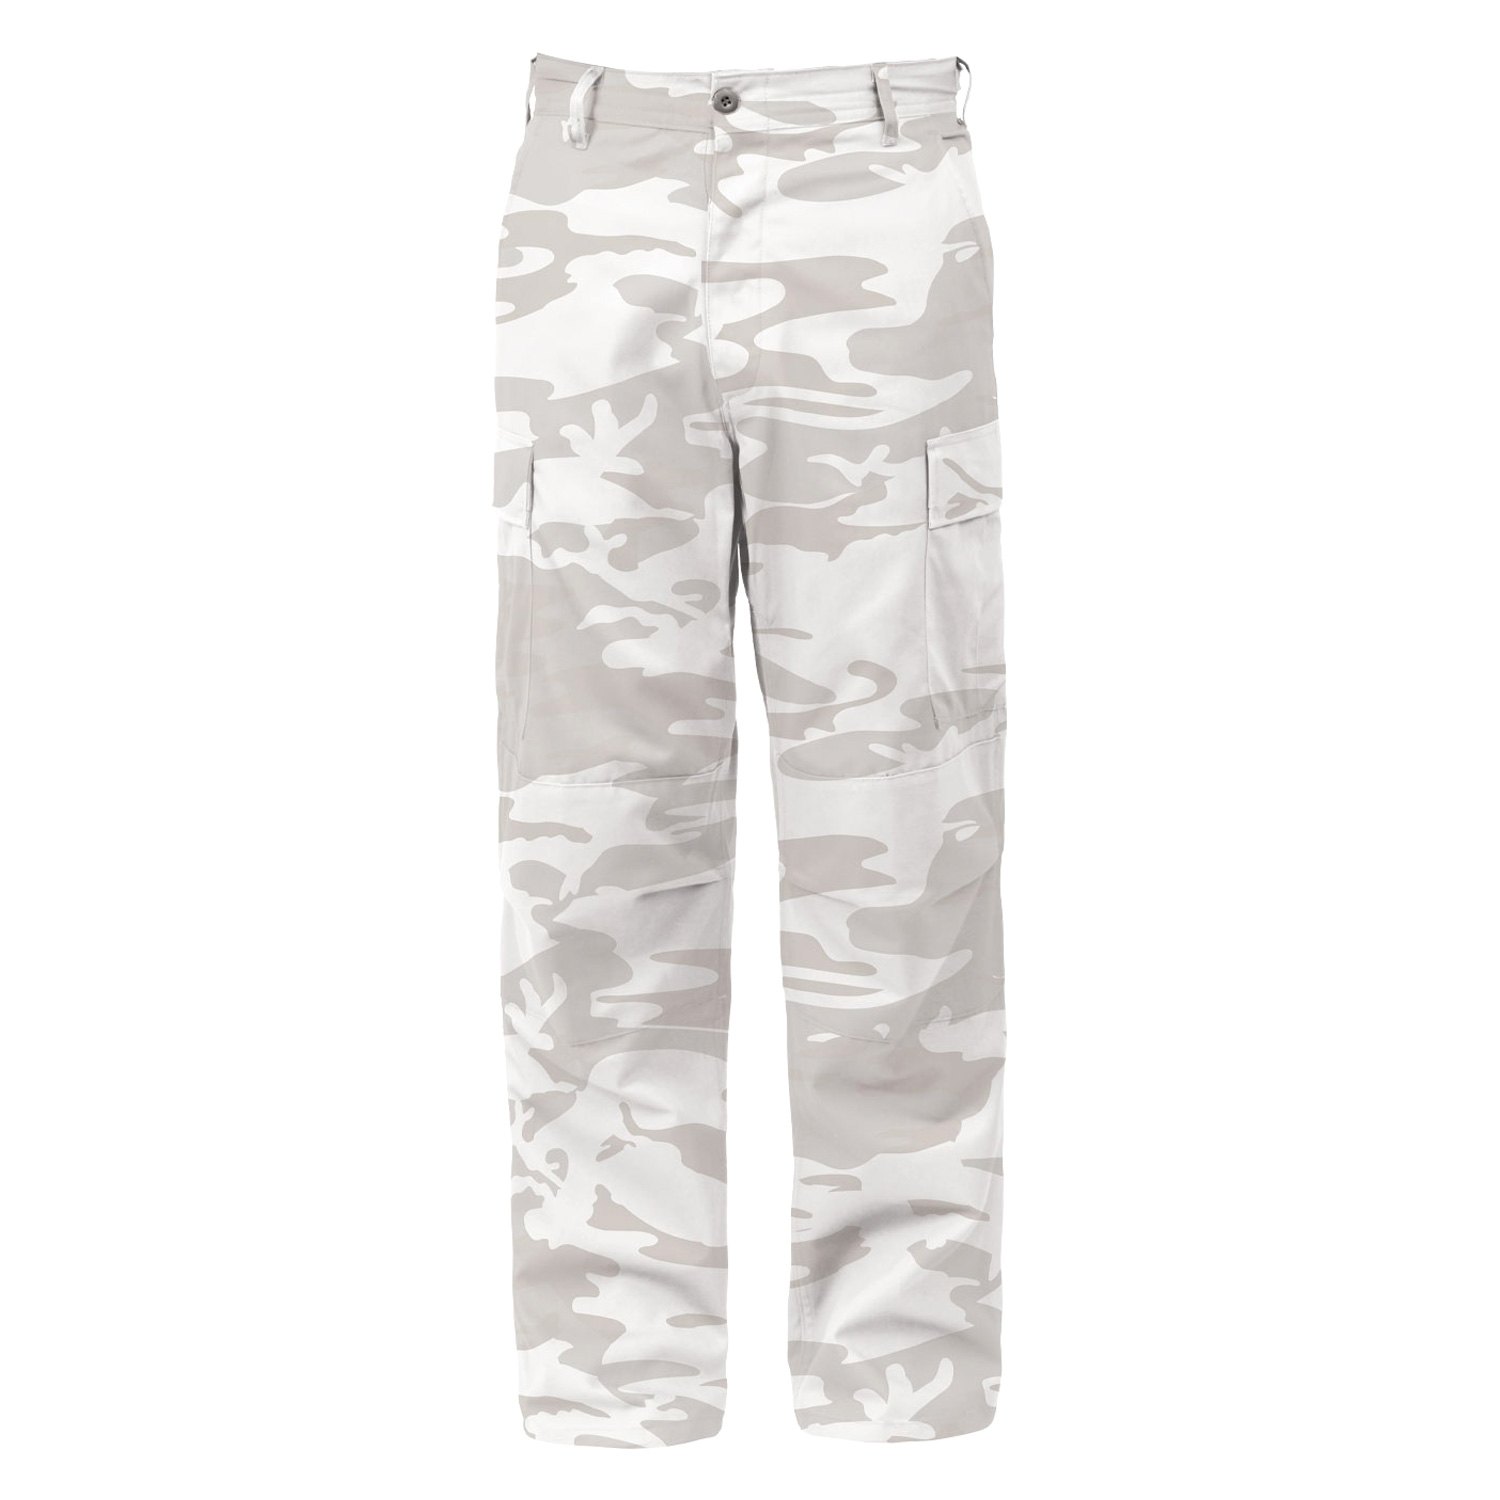 Swamp To separate Shortcuts Rothco® 4937-White Camo-2XL - BDU Tactical Men's 47" White Camo Pants -  RECREATIONiD.com